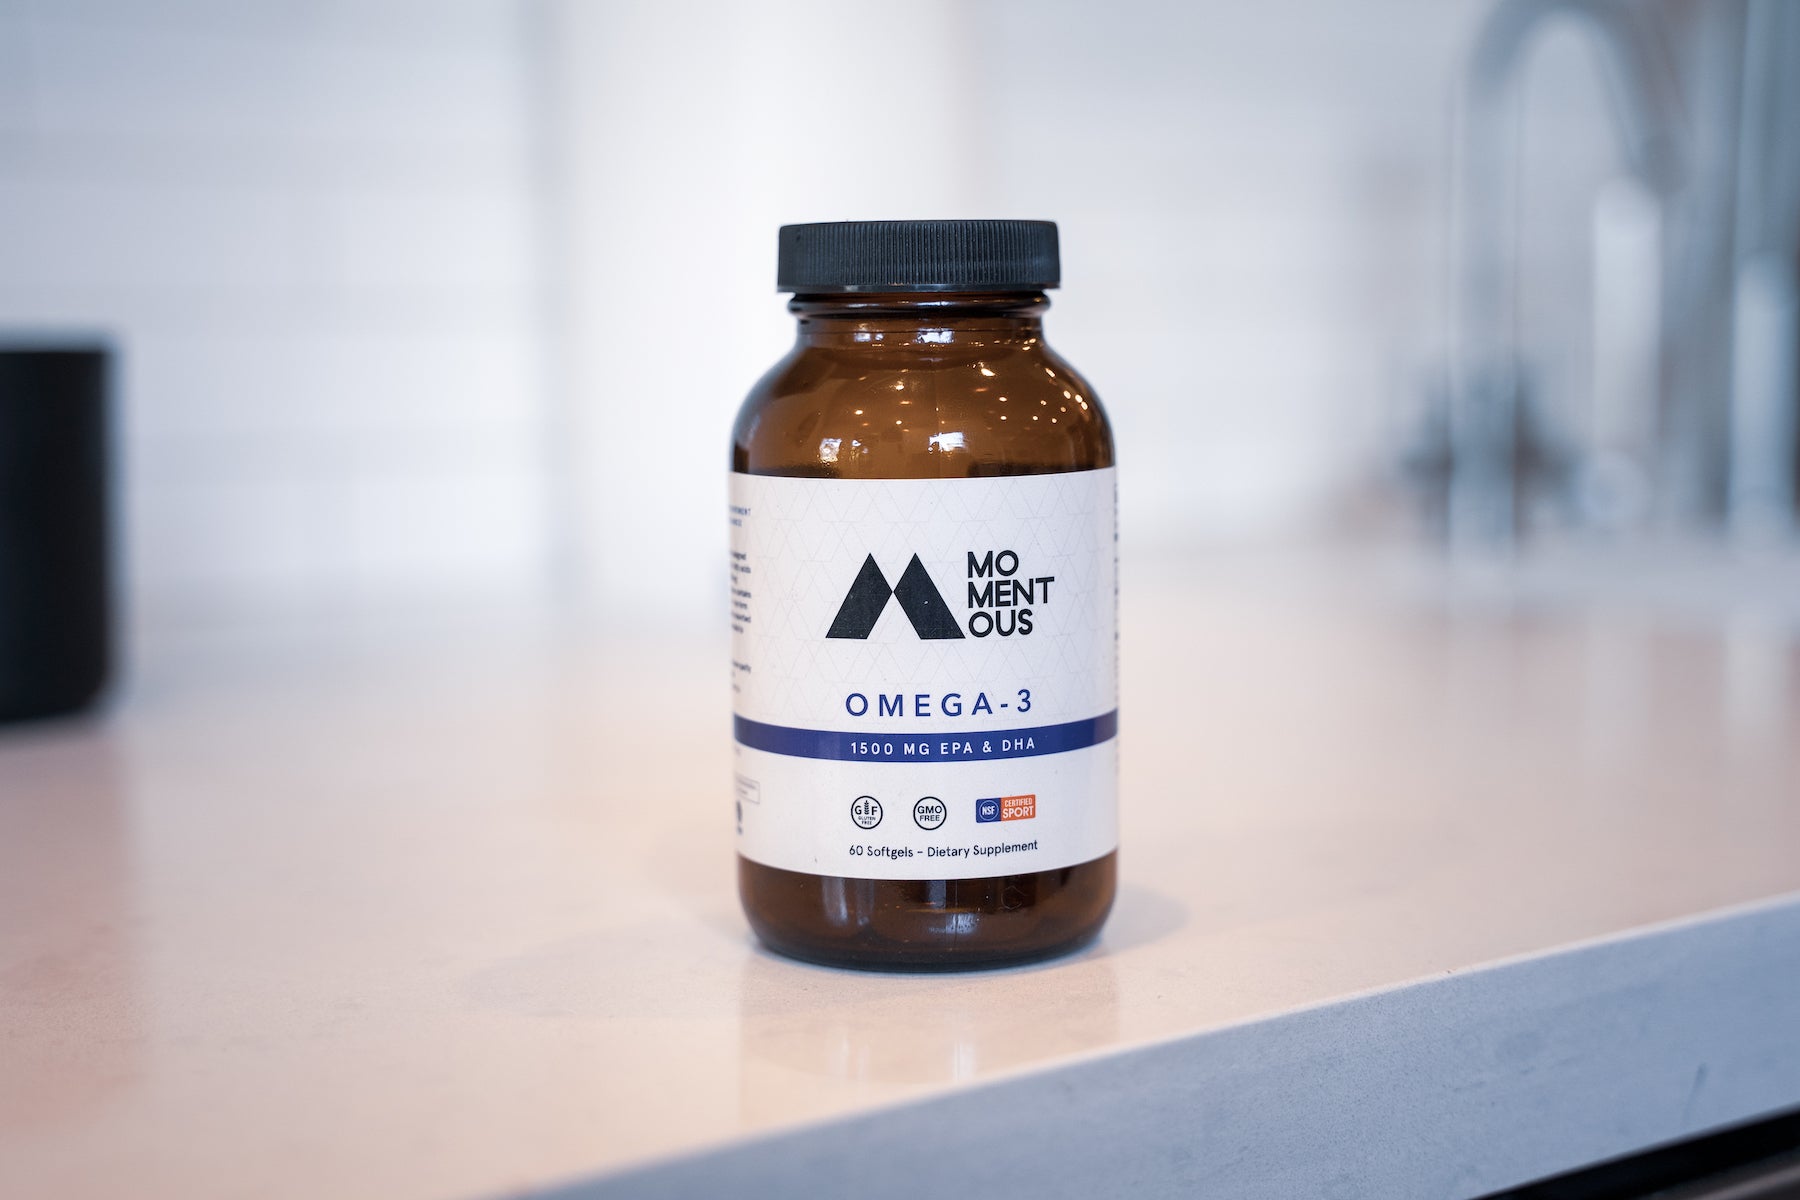 How Three Premium Ingredients Create a Better Omega-3 Supplement